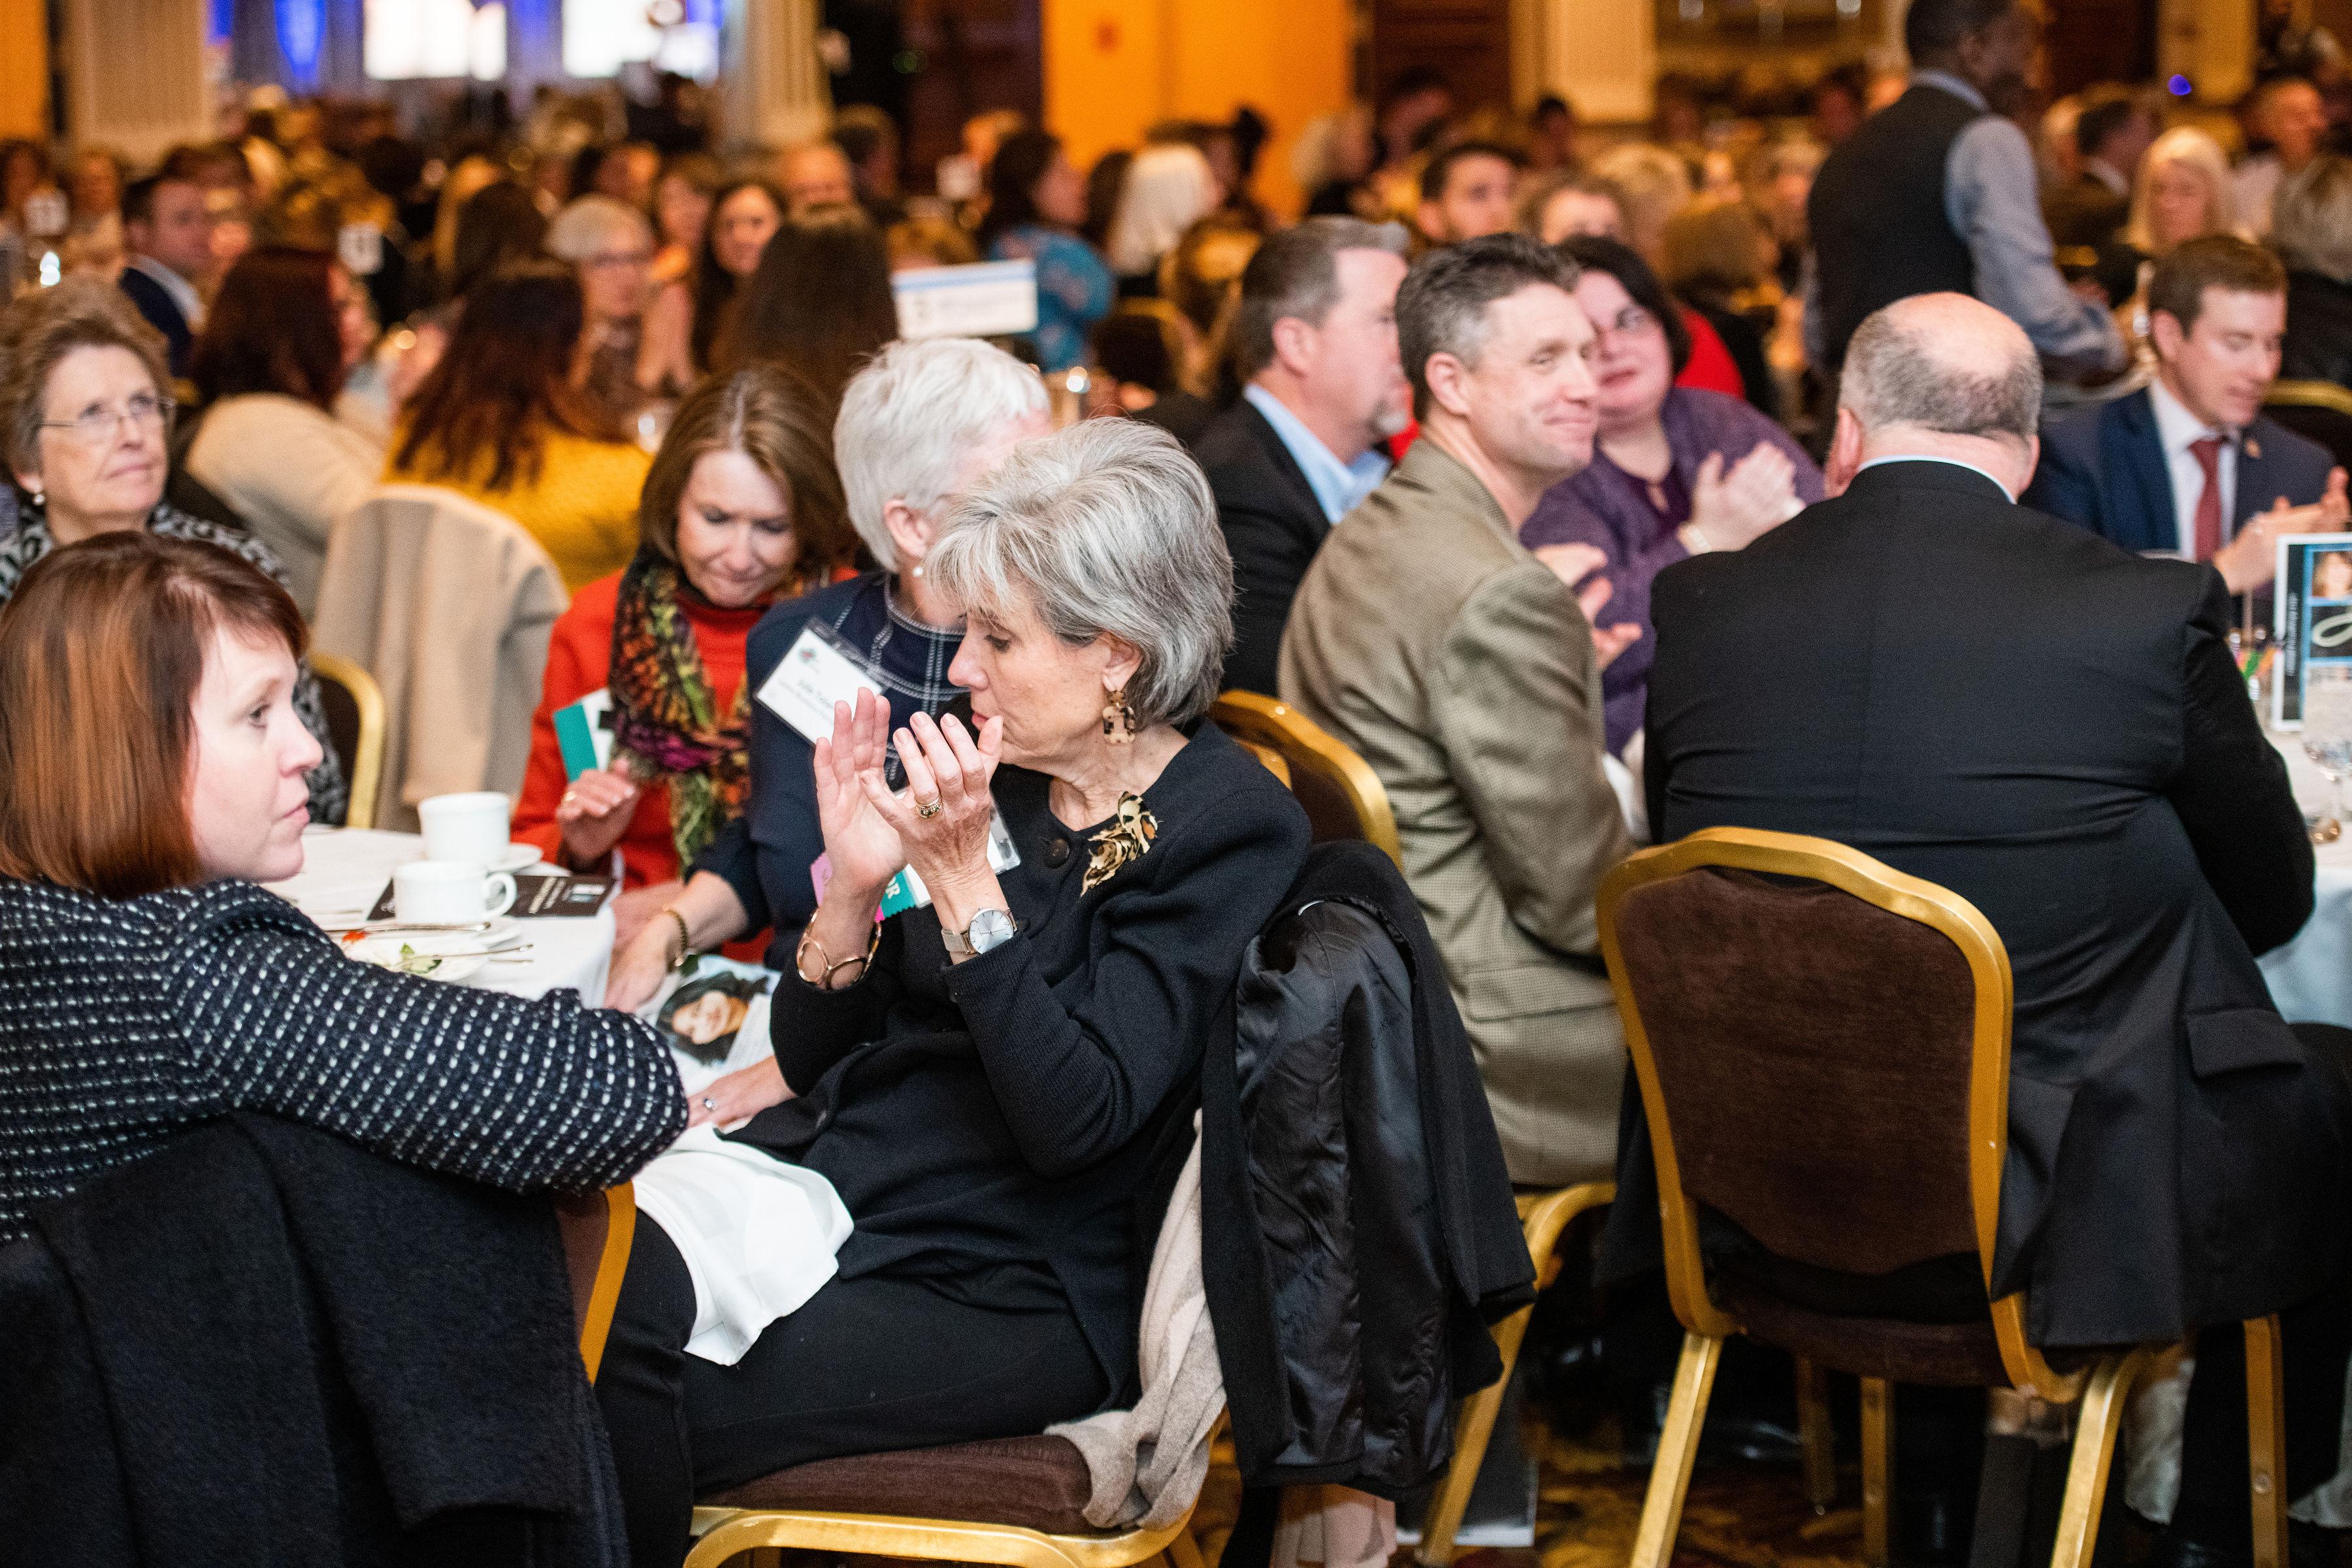 2019 National Philanthropy Day Awards Luncheon